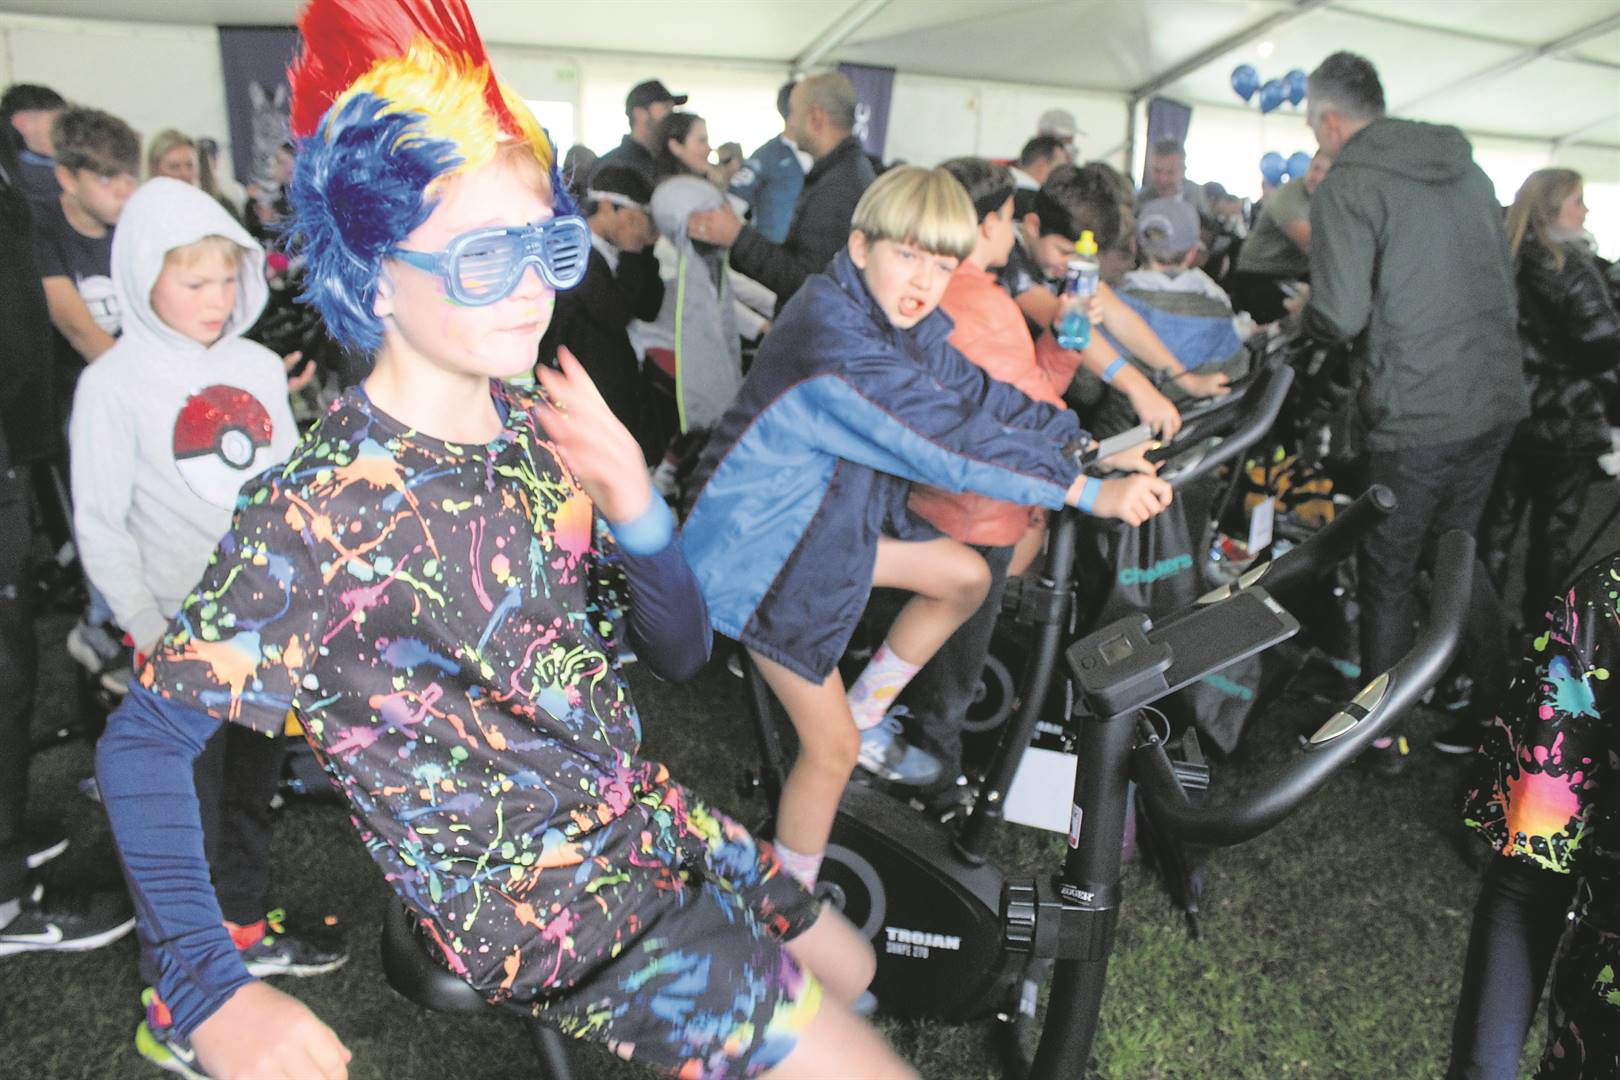 Early on in the challenge, 11-year-old William Lunn, showed great team spirit by pedalling in true punk rock fashion, said he bet the day will be full of fun and excitement. 